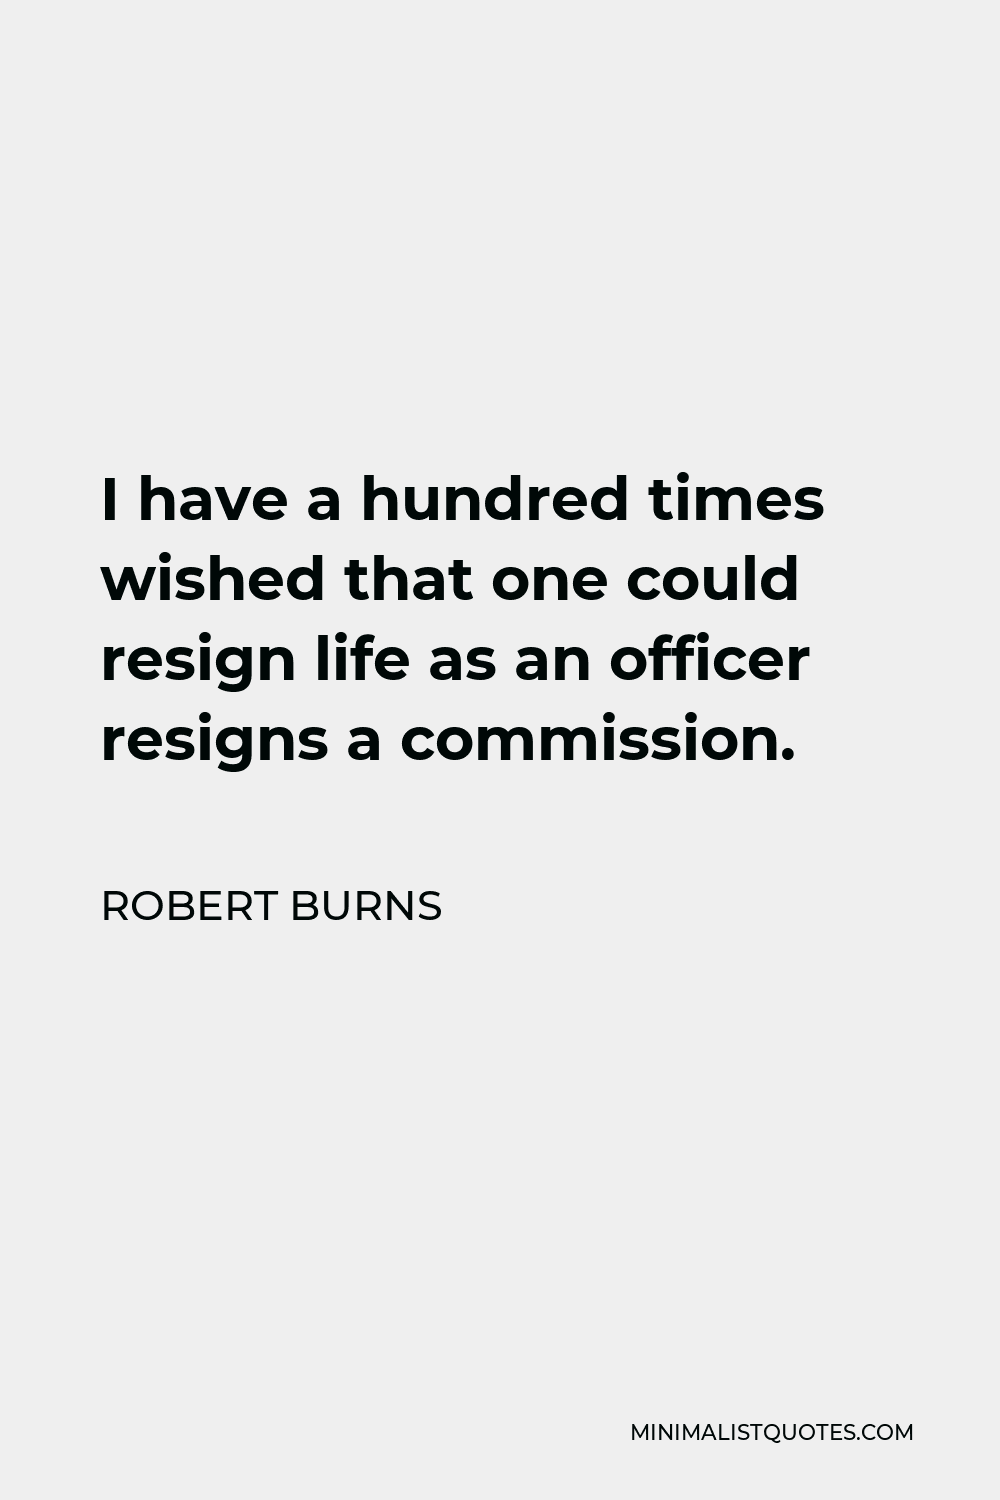 Robert Burns Quote - I have a hundred times wished that one could resign life as an officer resigns a commission.